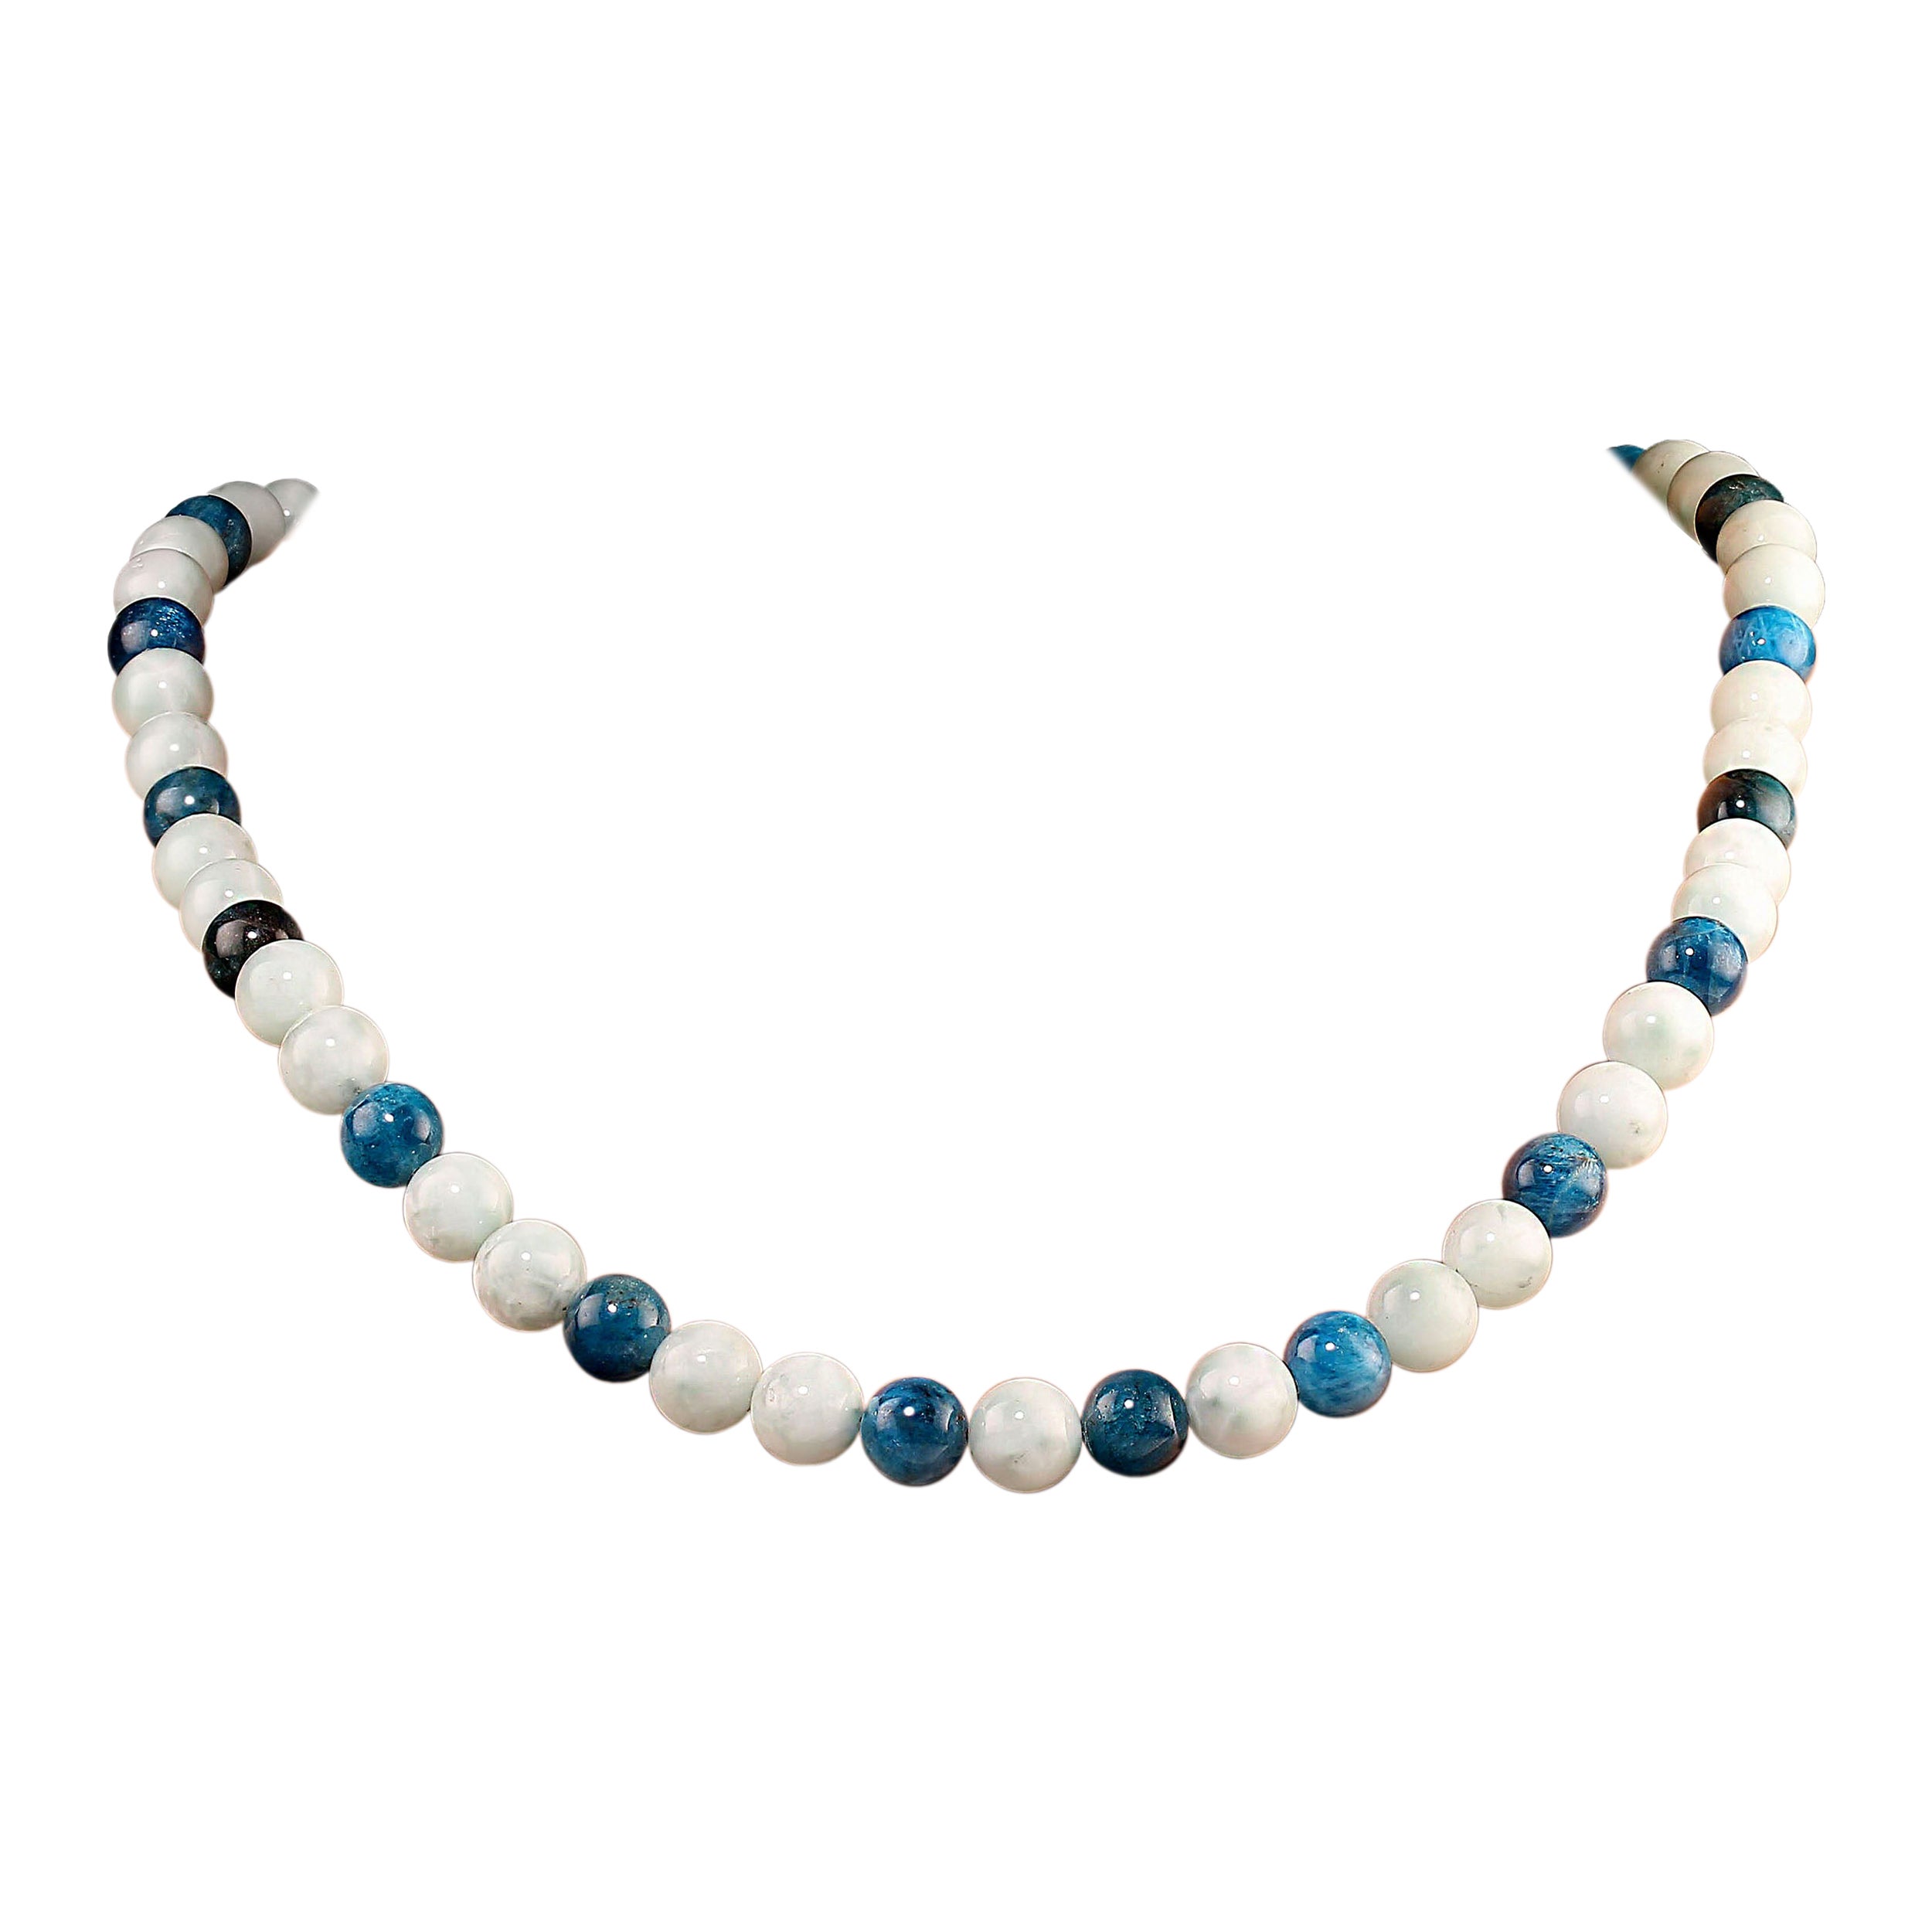 25-inch angelite and apatite necklace in shades of soft green and deep green. These gorgeous 10mm gemstones are smooth and highly polished. The necklace is secured with a silver plate box clasp with green druzy accent.  MN2413 